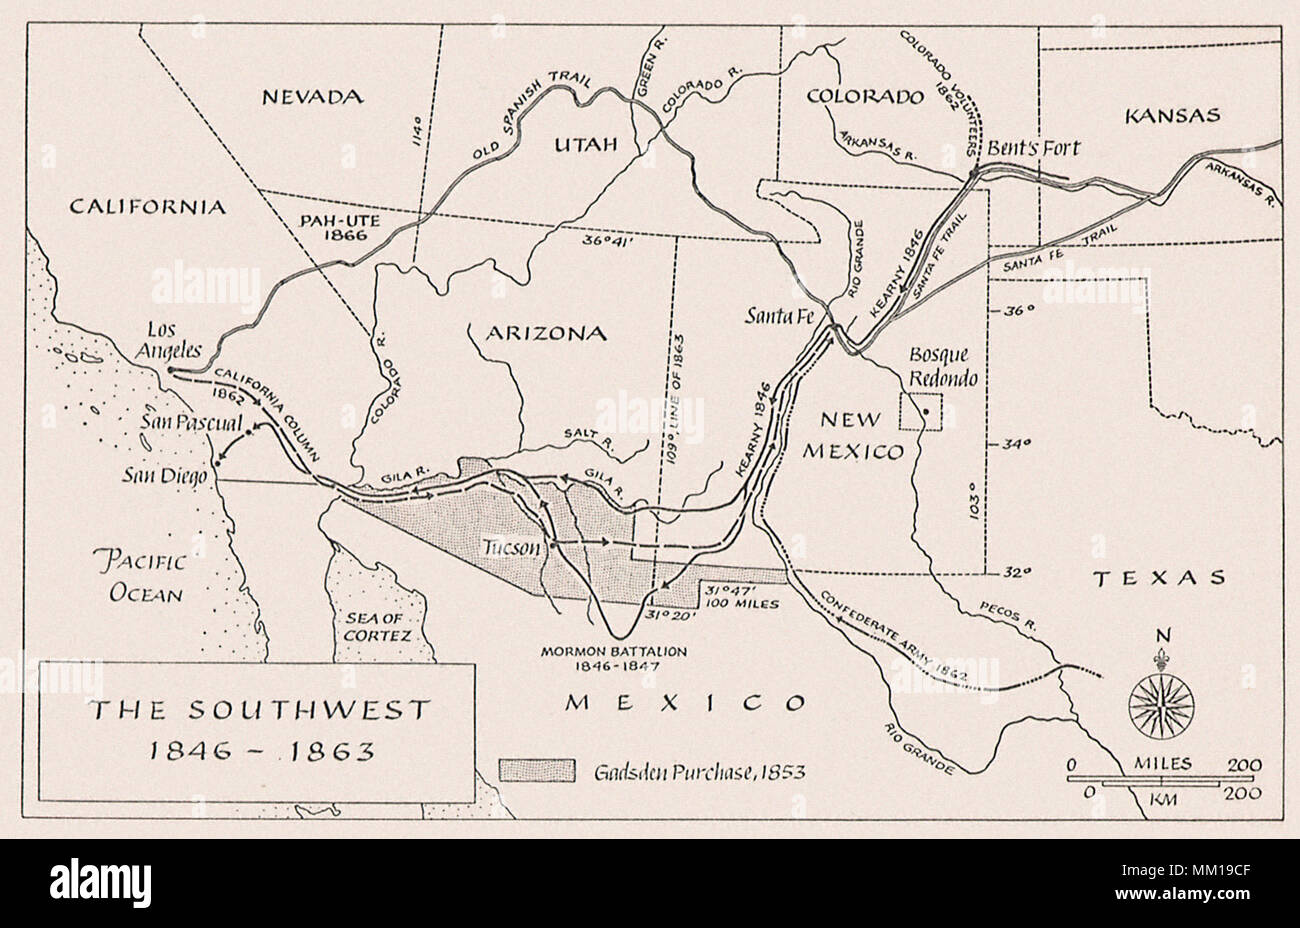 Map of the Southwest, 1846 - 1863 Stock Photo